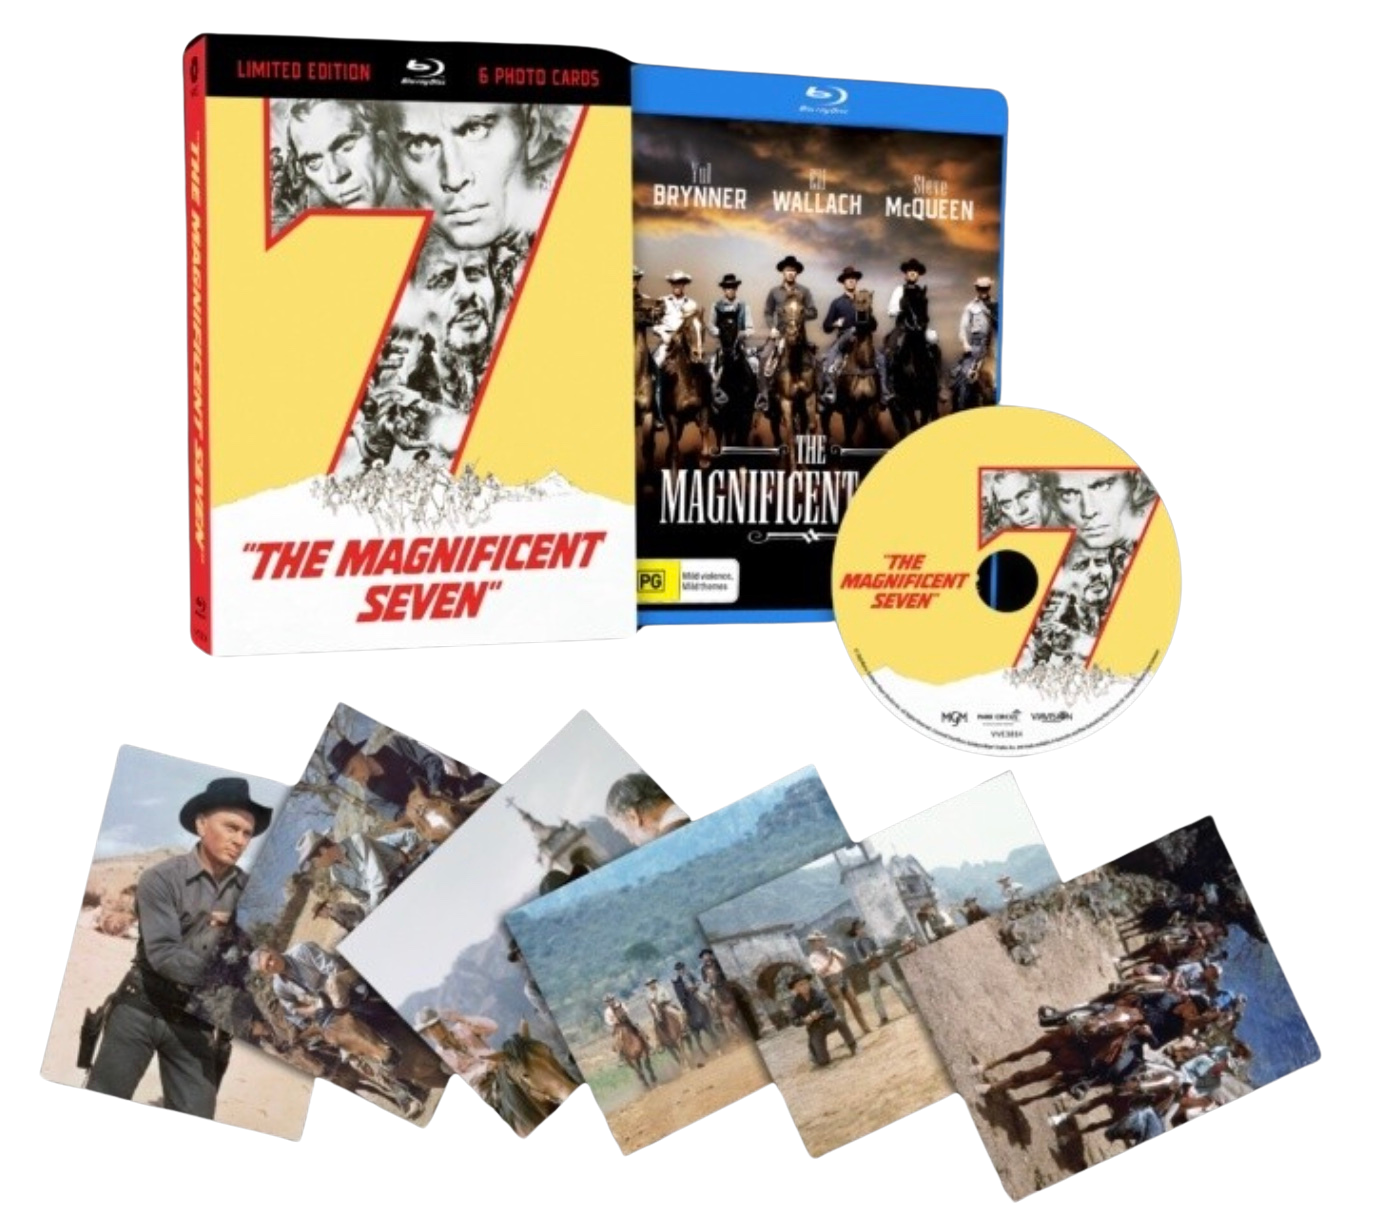 The Magnificent Seven (Limited Edition Blu-ray)